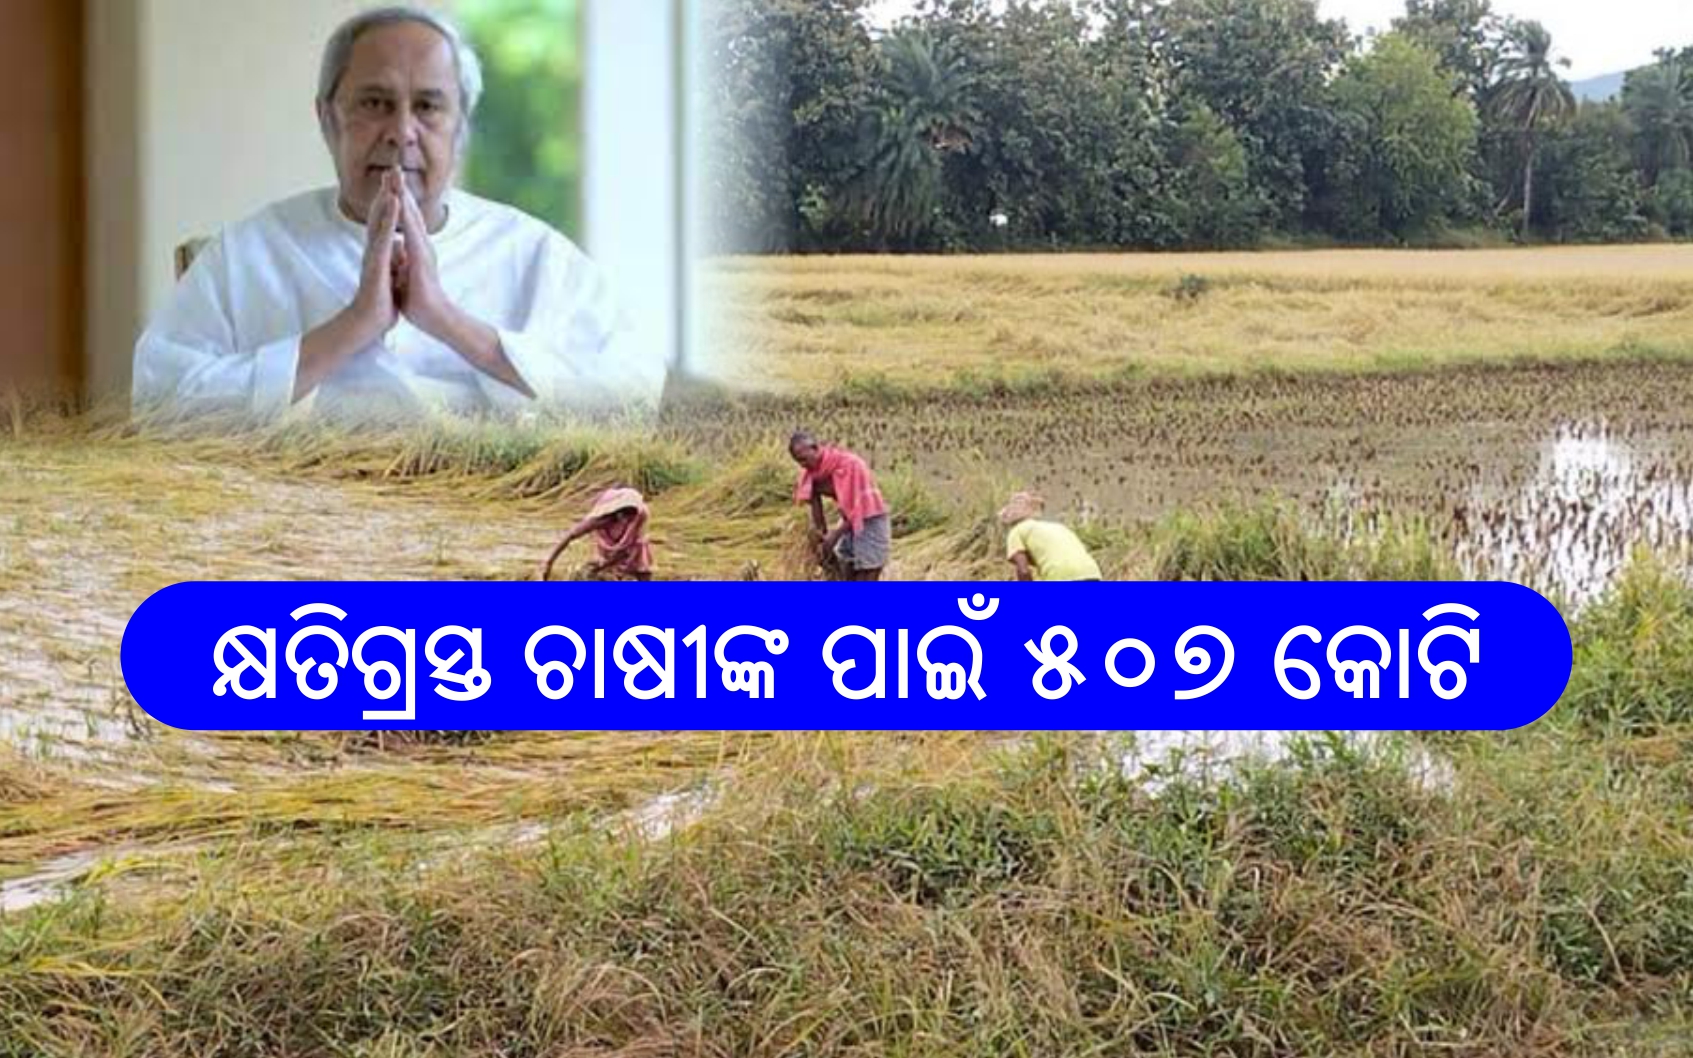 cm naveen patnaik declared 507 cr package for farmers